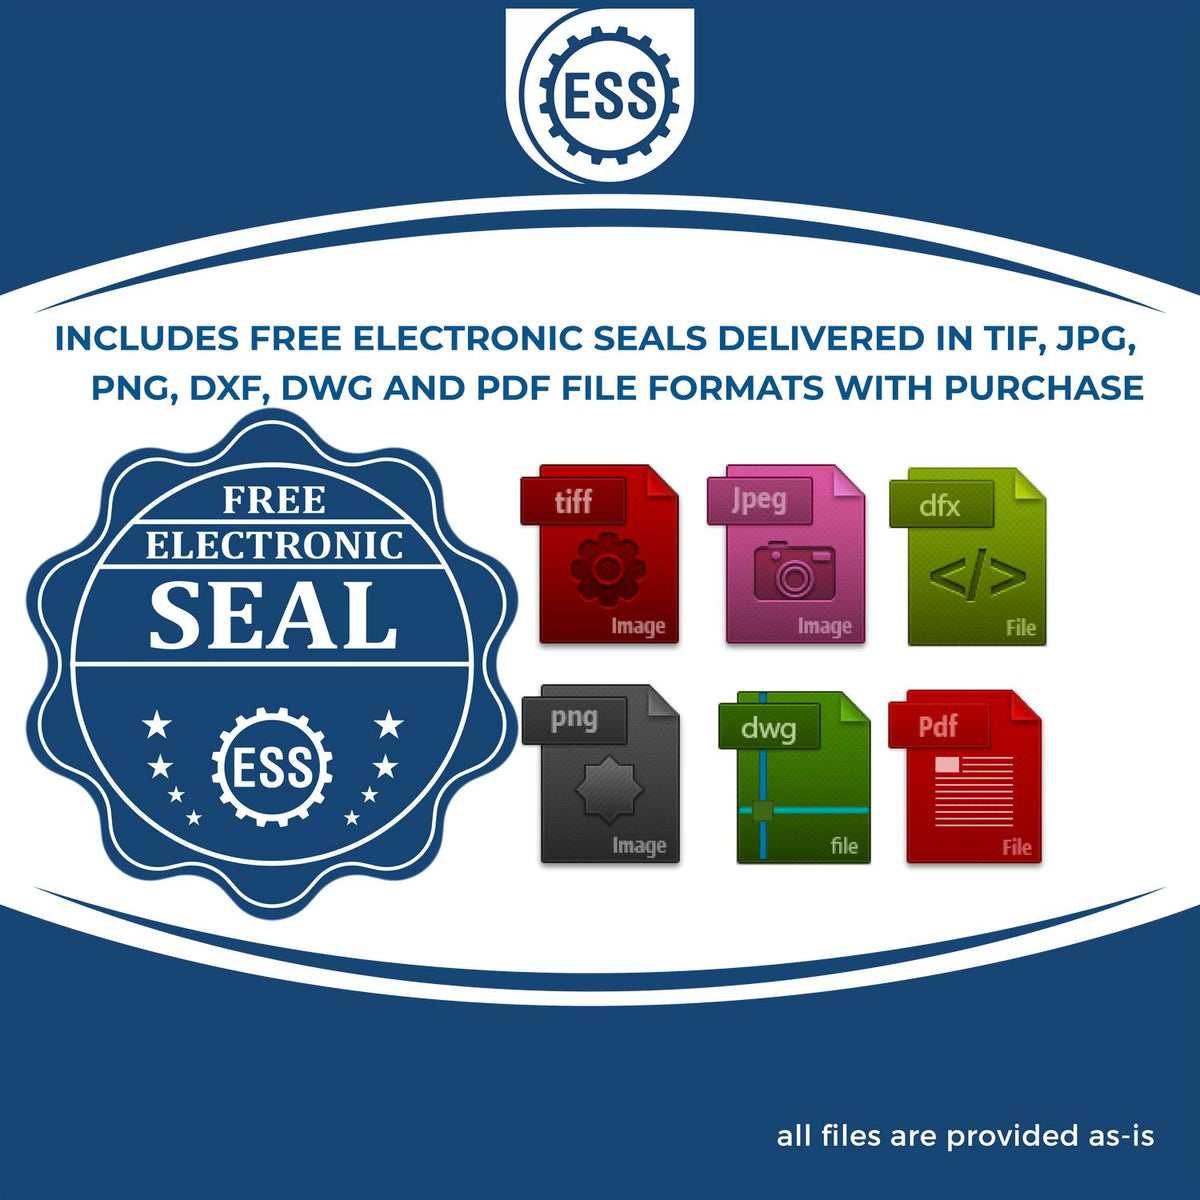 An infographic for the free electronic seal for the Self-Inking West Virginia Geologist Stamp illustrating the different file type icons such as DXF, DWG, TIF, JPG and PNG.